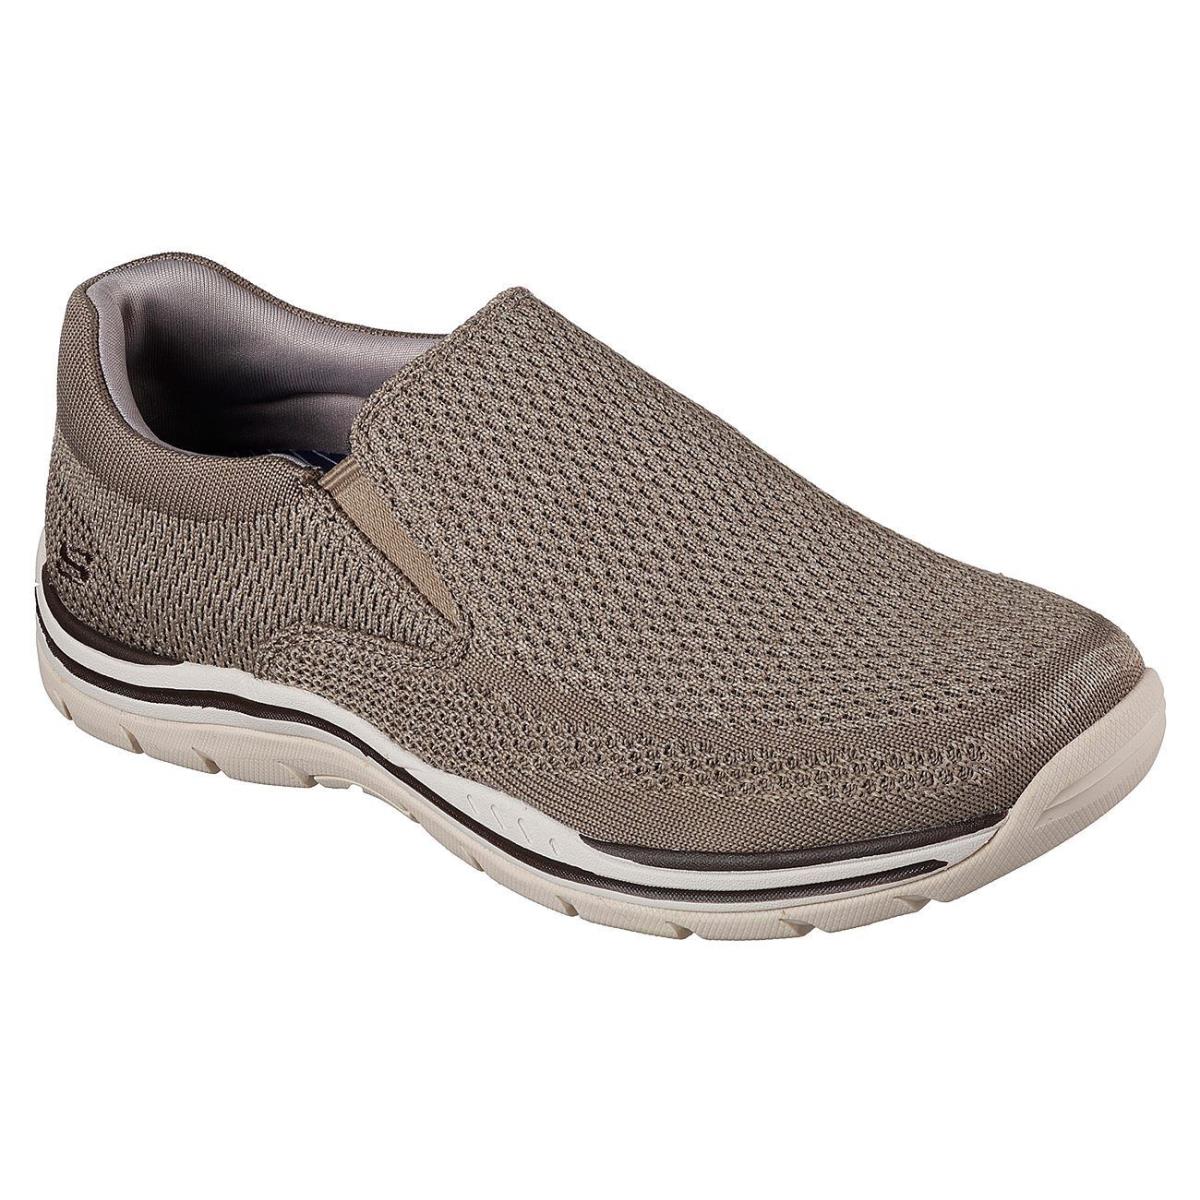 Men`s Skechers Relaxed Expected Gomel Loafer Shoes 65086 /tpe Sizes 8-14 Taupe